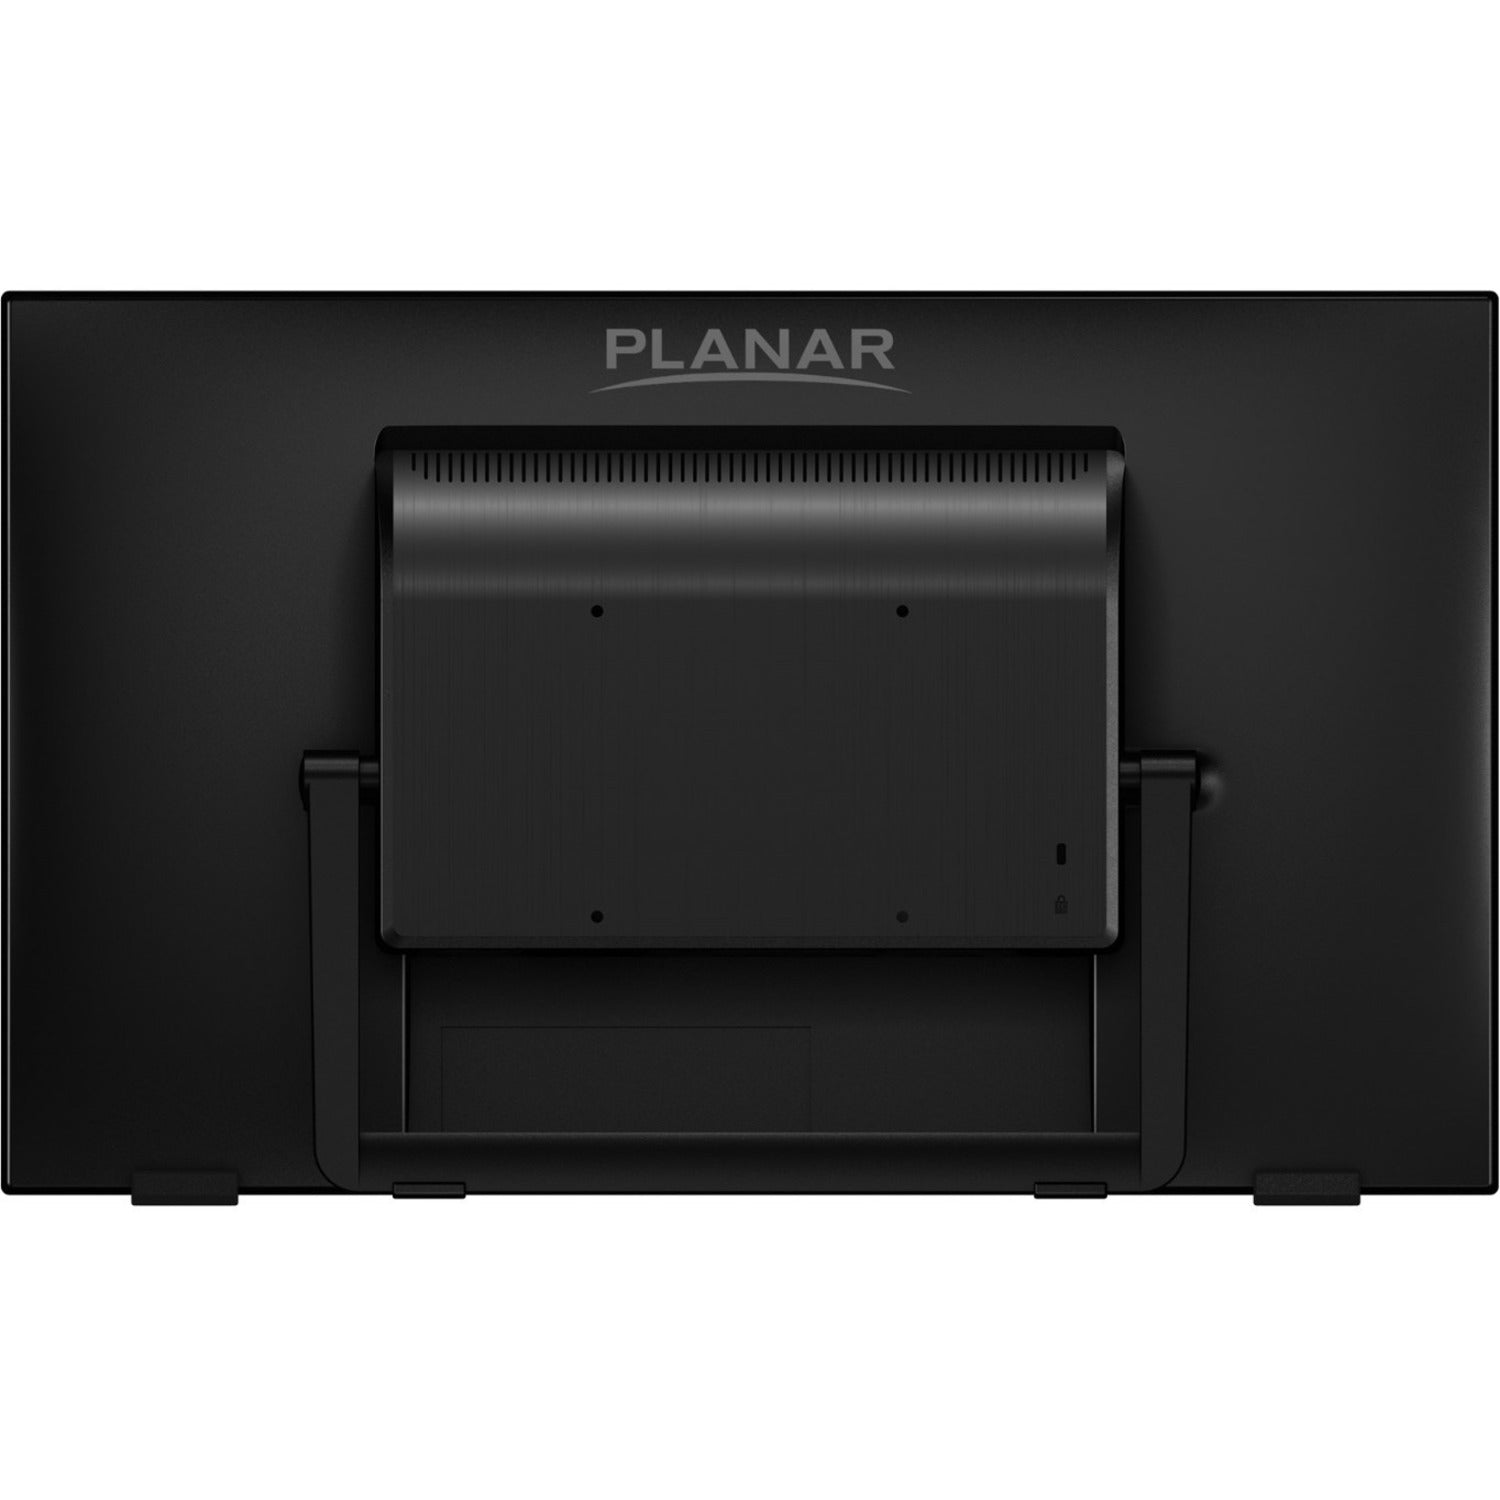 Planar 997-8286-00 PCT2235 22" Touch Screen Monitor, Full HD, Multi-Touch, Edge-Lit, Black